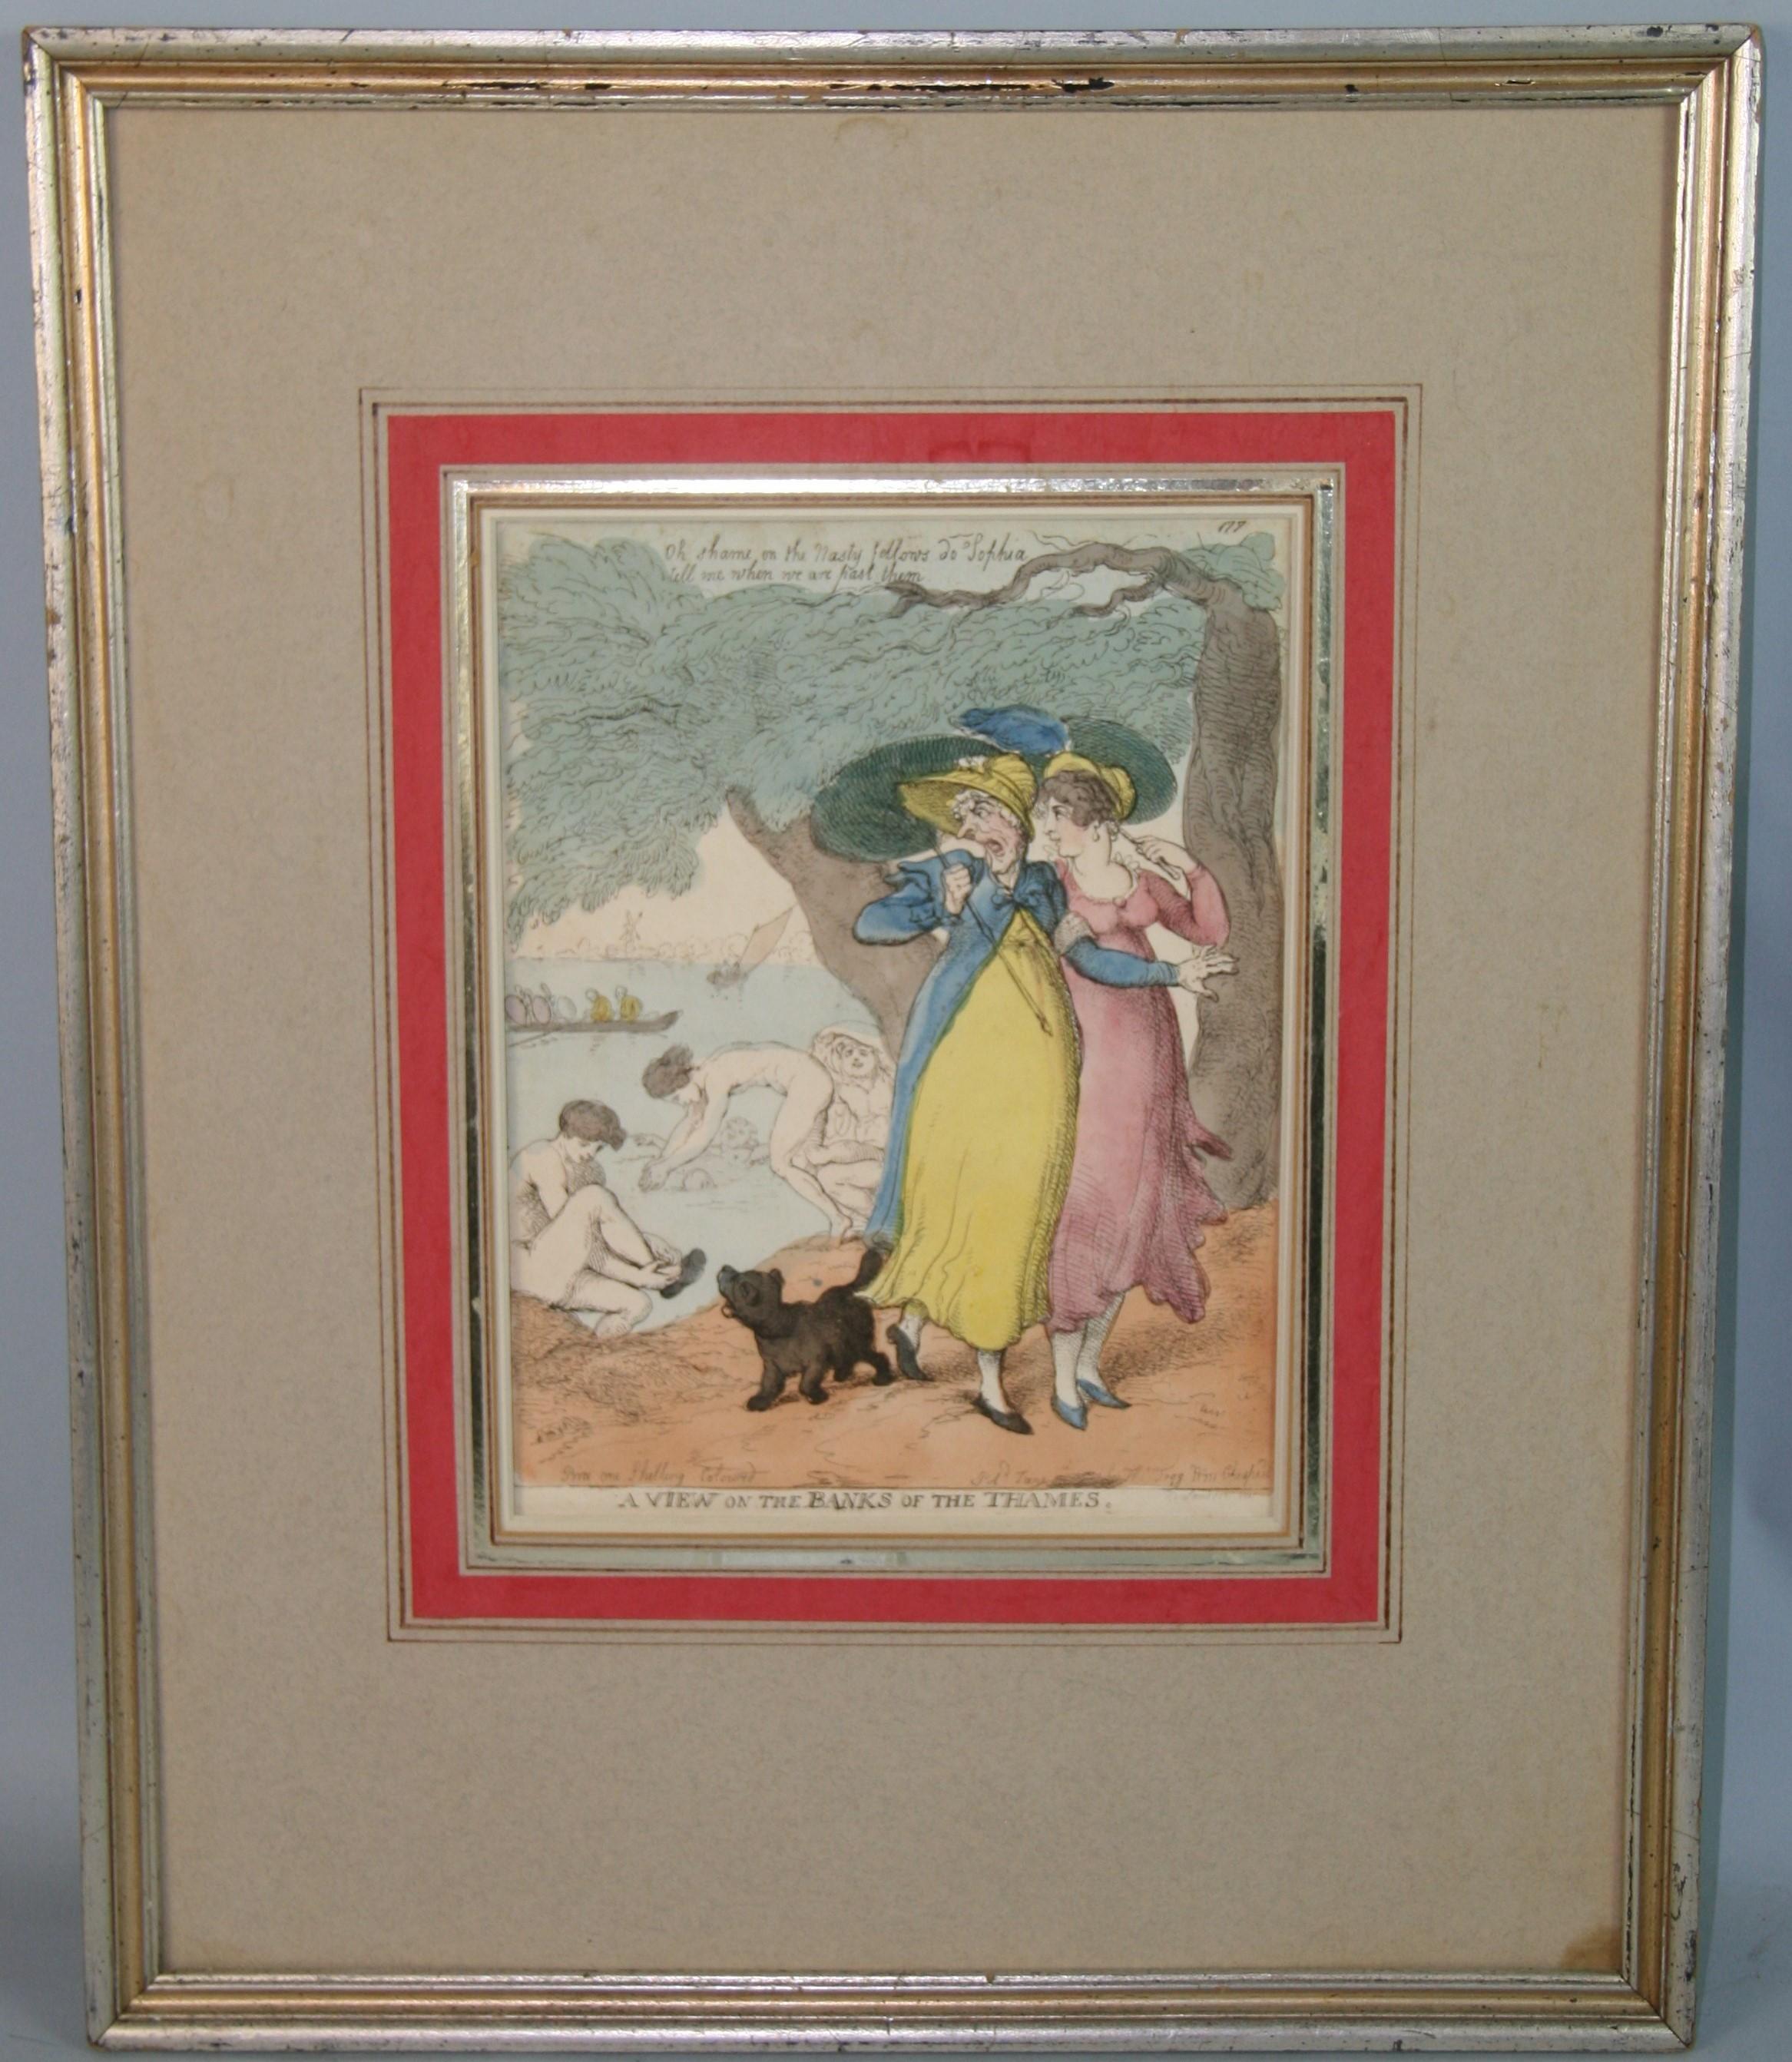 5066 Late 19th century watercolored engraving  set in a silvered wood frame